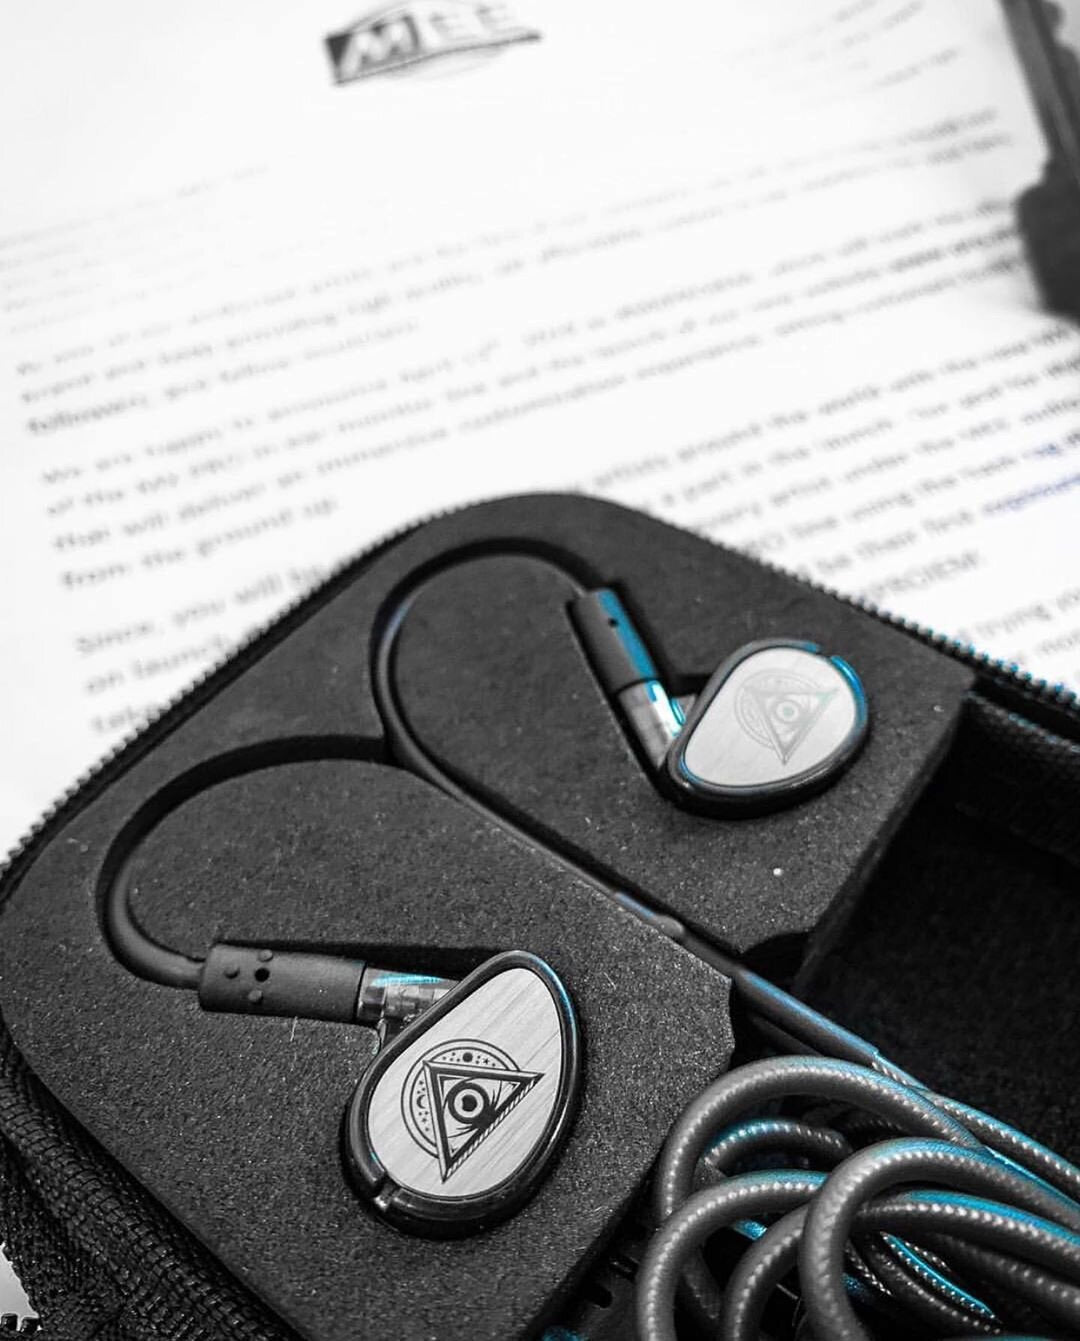 A pair of high-end in-ear headphones with metallic design and balanced armature drivers, sitting in a foam insert of its storage box, contrasted against a blurred document in the background. color highlights in blue and tones in grayscale.